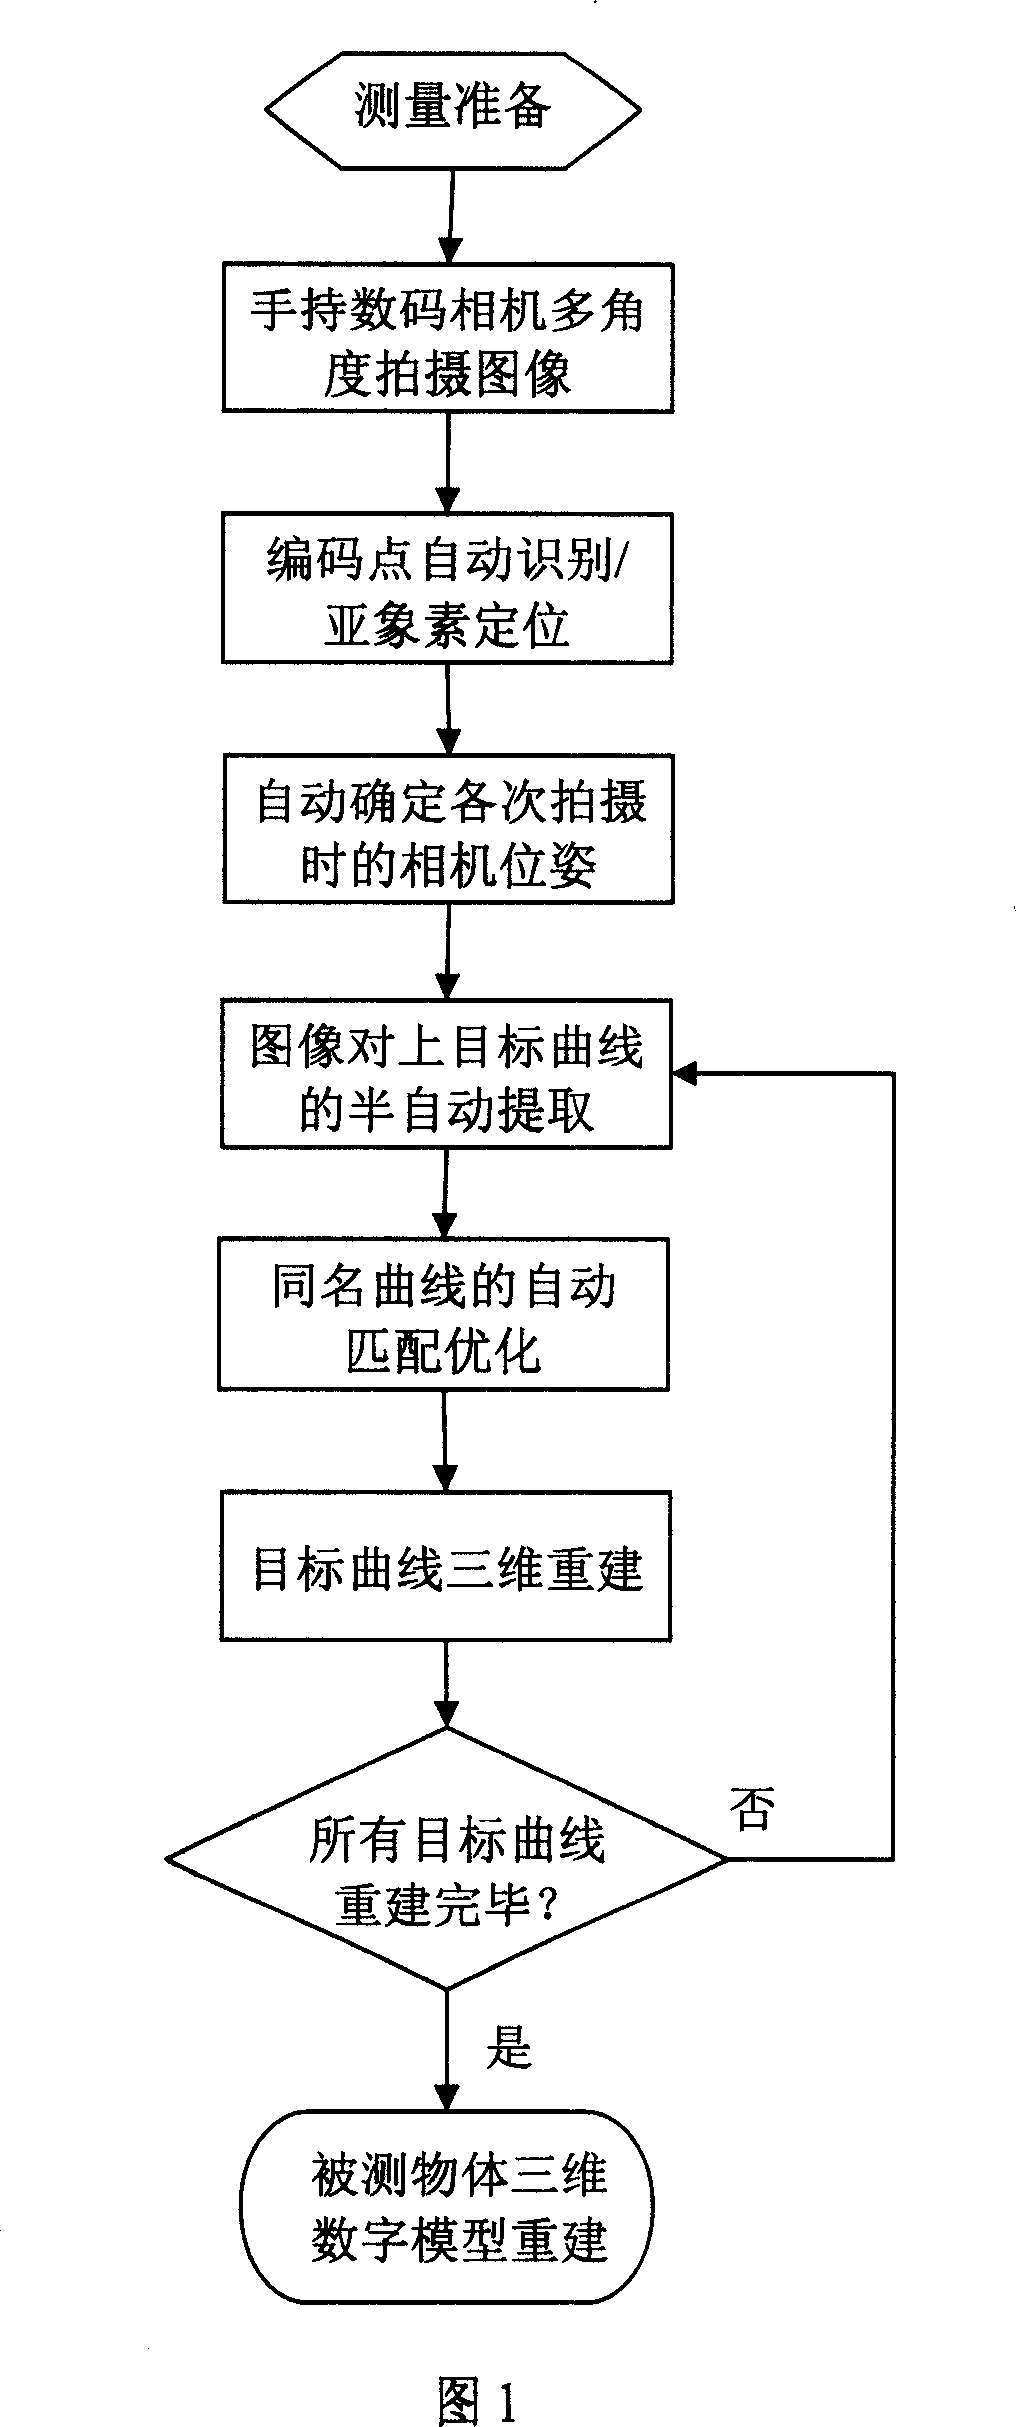 Method for making three-dimensional measurement of objects utilizing single digital camera to freely shoot